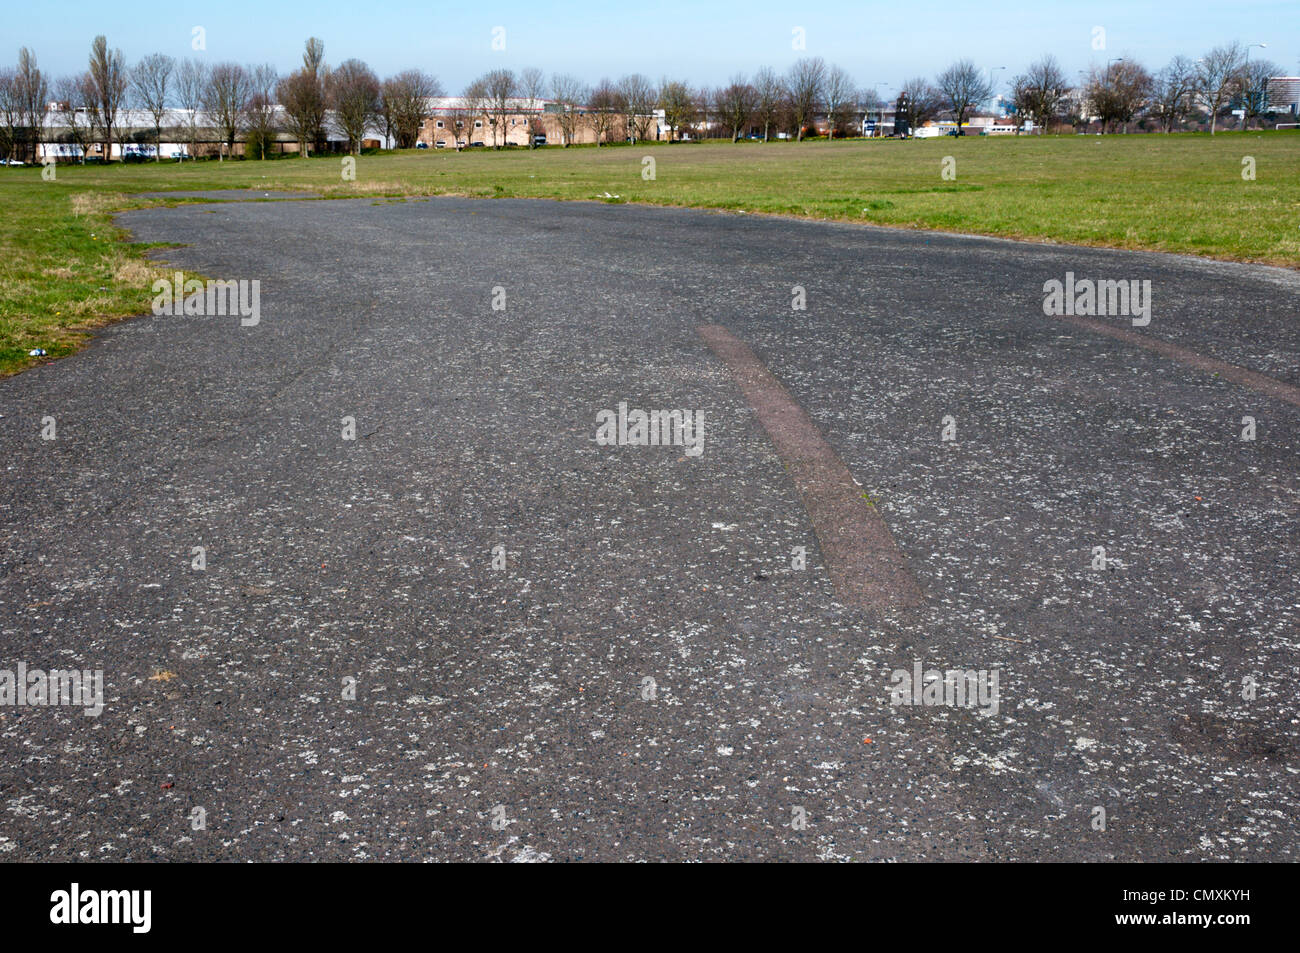 This area of tarmac is all that is left of the runways of the old Croydon Aerodrome in Roundshaw Park. SEE DESC FOR DETAILS. Stock Photo